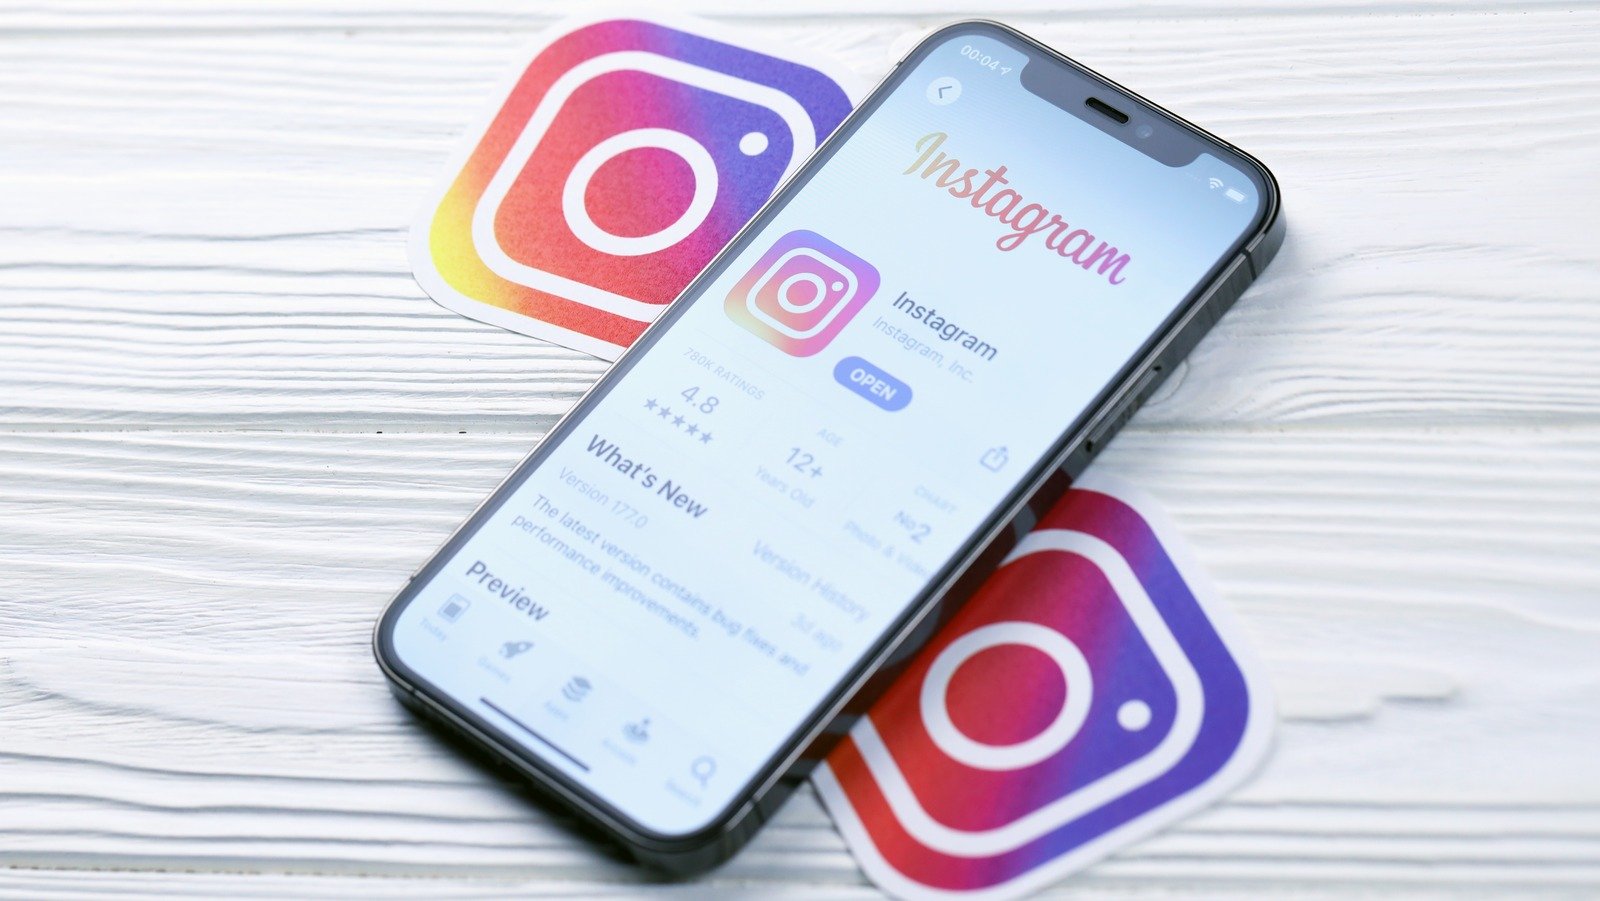 The Instagram App Is Finally Adding An Account Deletion Feature - Here's How To Use It